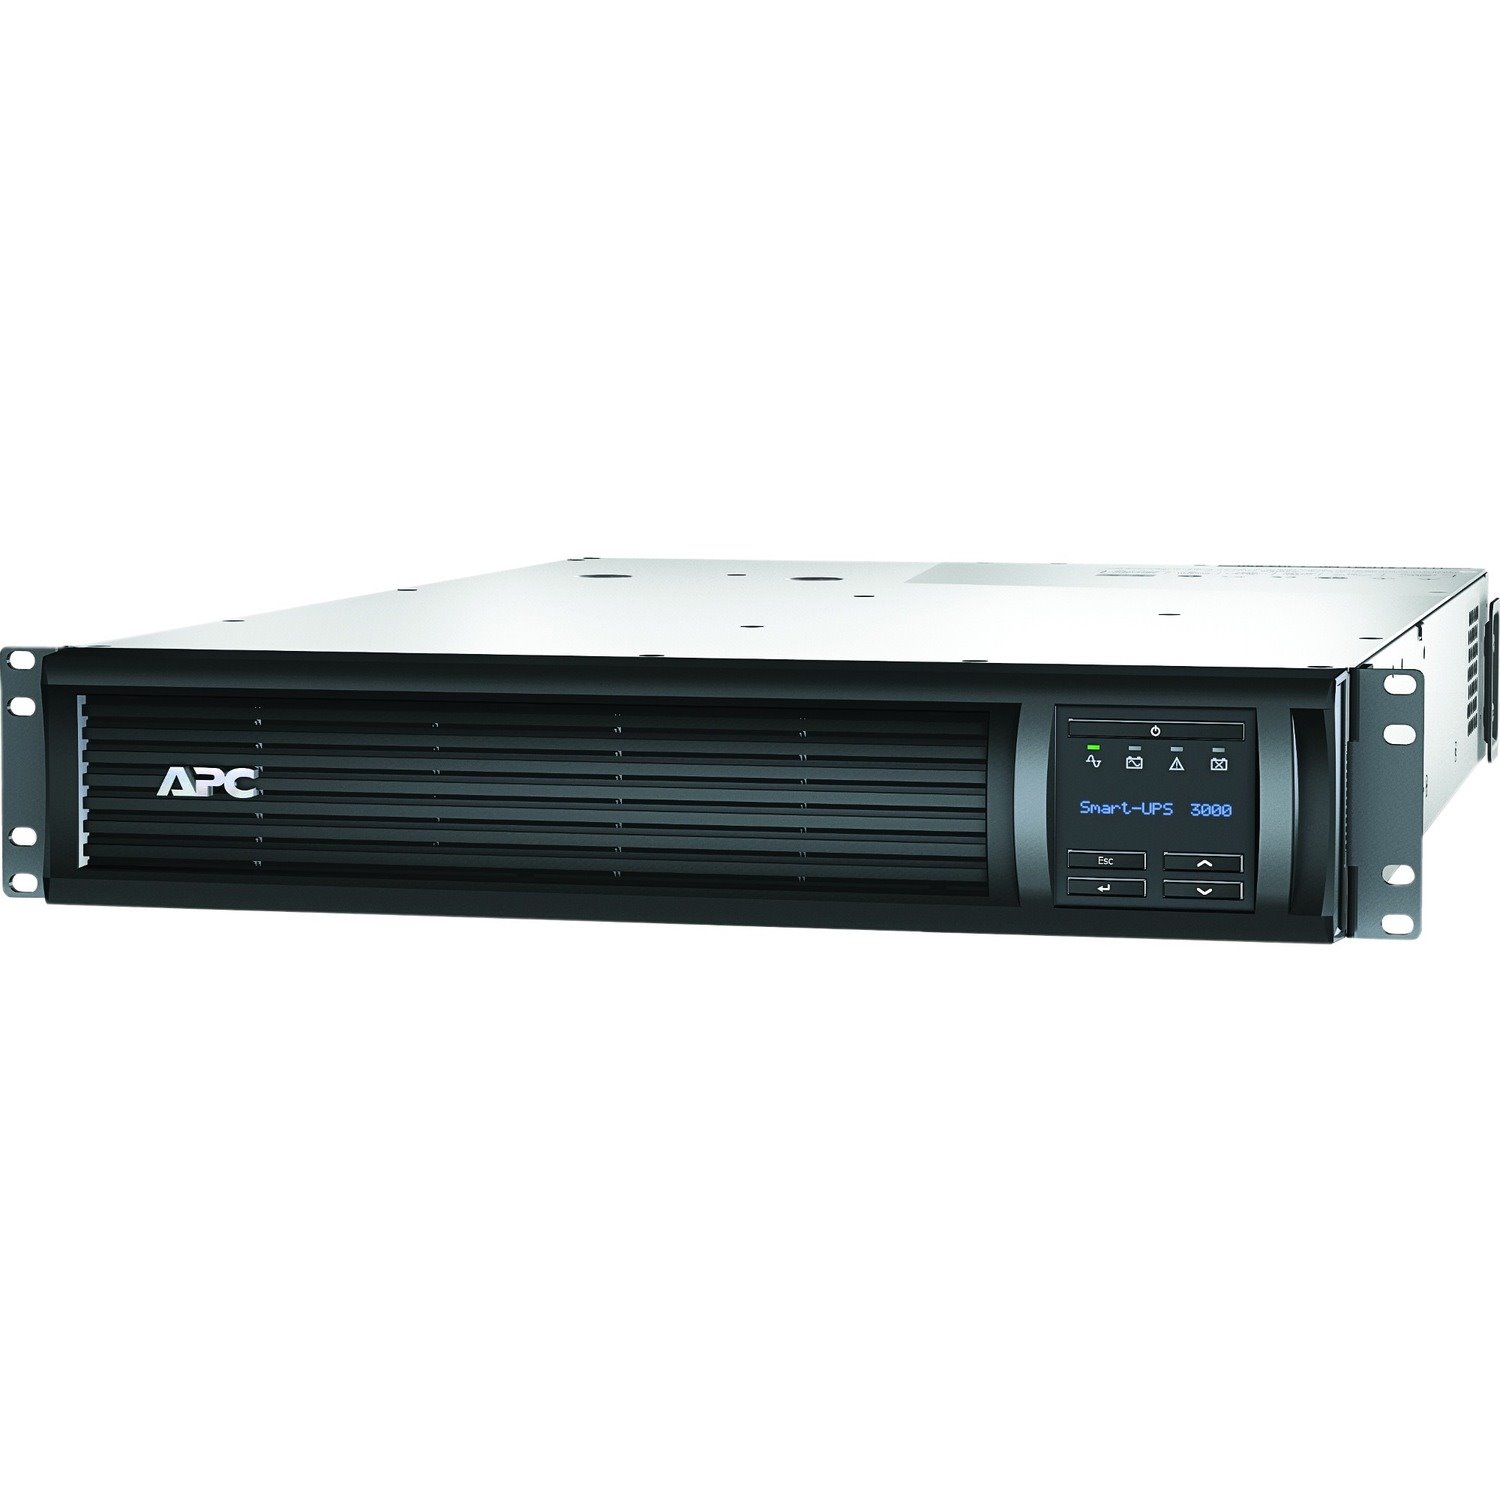 SMT3000RMI2UC - APC by Schneider Electric Smart-UPS Line-interactive UPS 3kVA / 2.7kW. Includes 3 Years Parts Warranty, Smart Connect Cloud Monitoring & Rack Mounting Kit